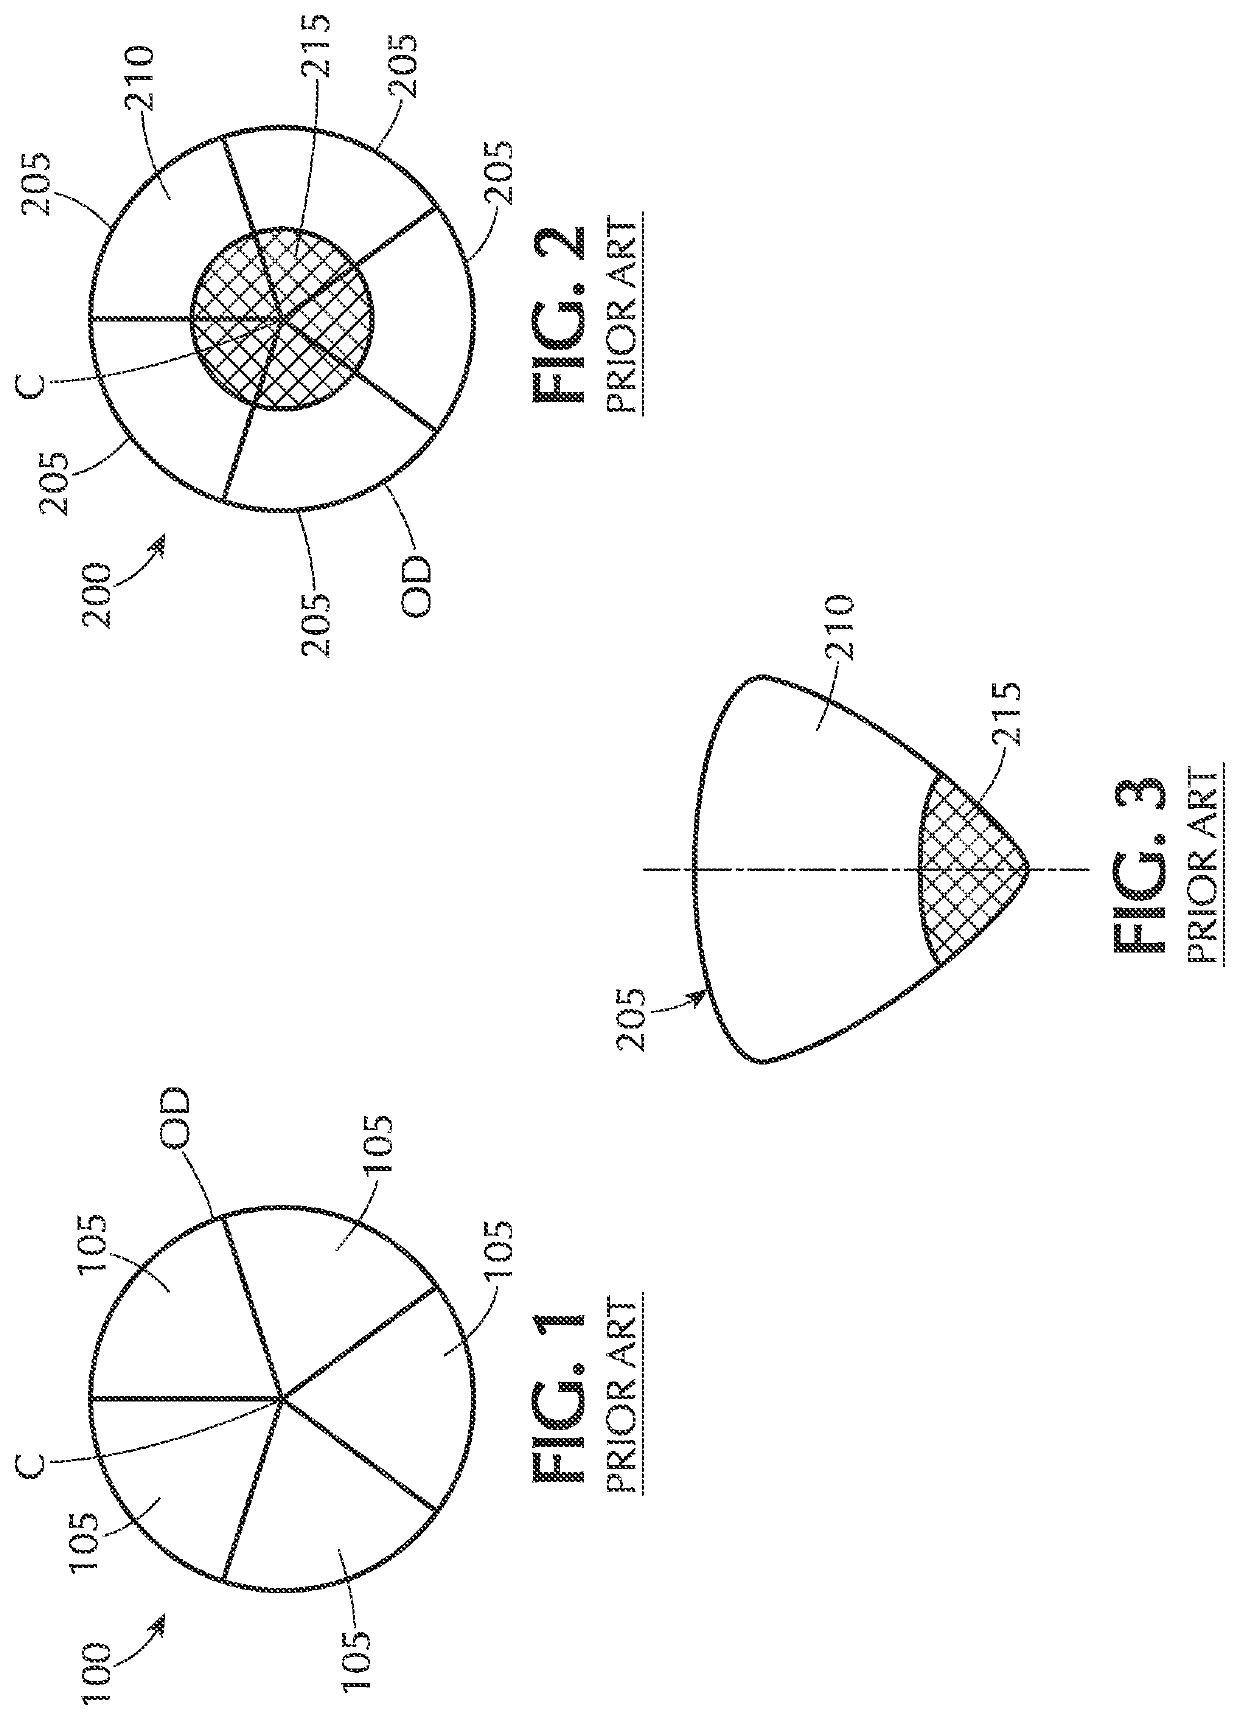 Visibility of Mechanical Thrombectomy Device During Diagnostic Imaging